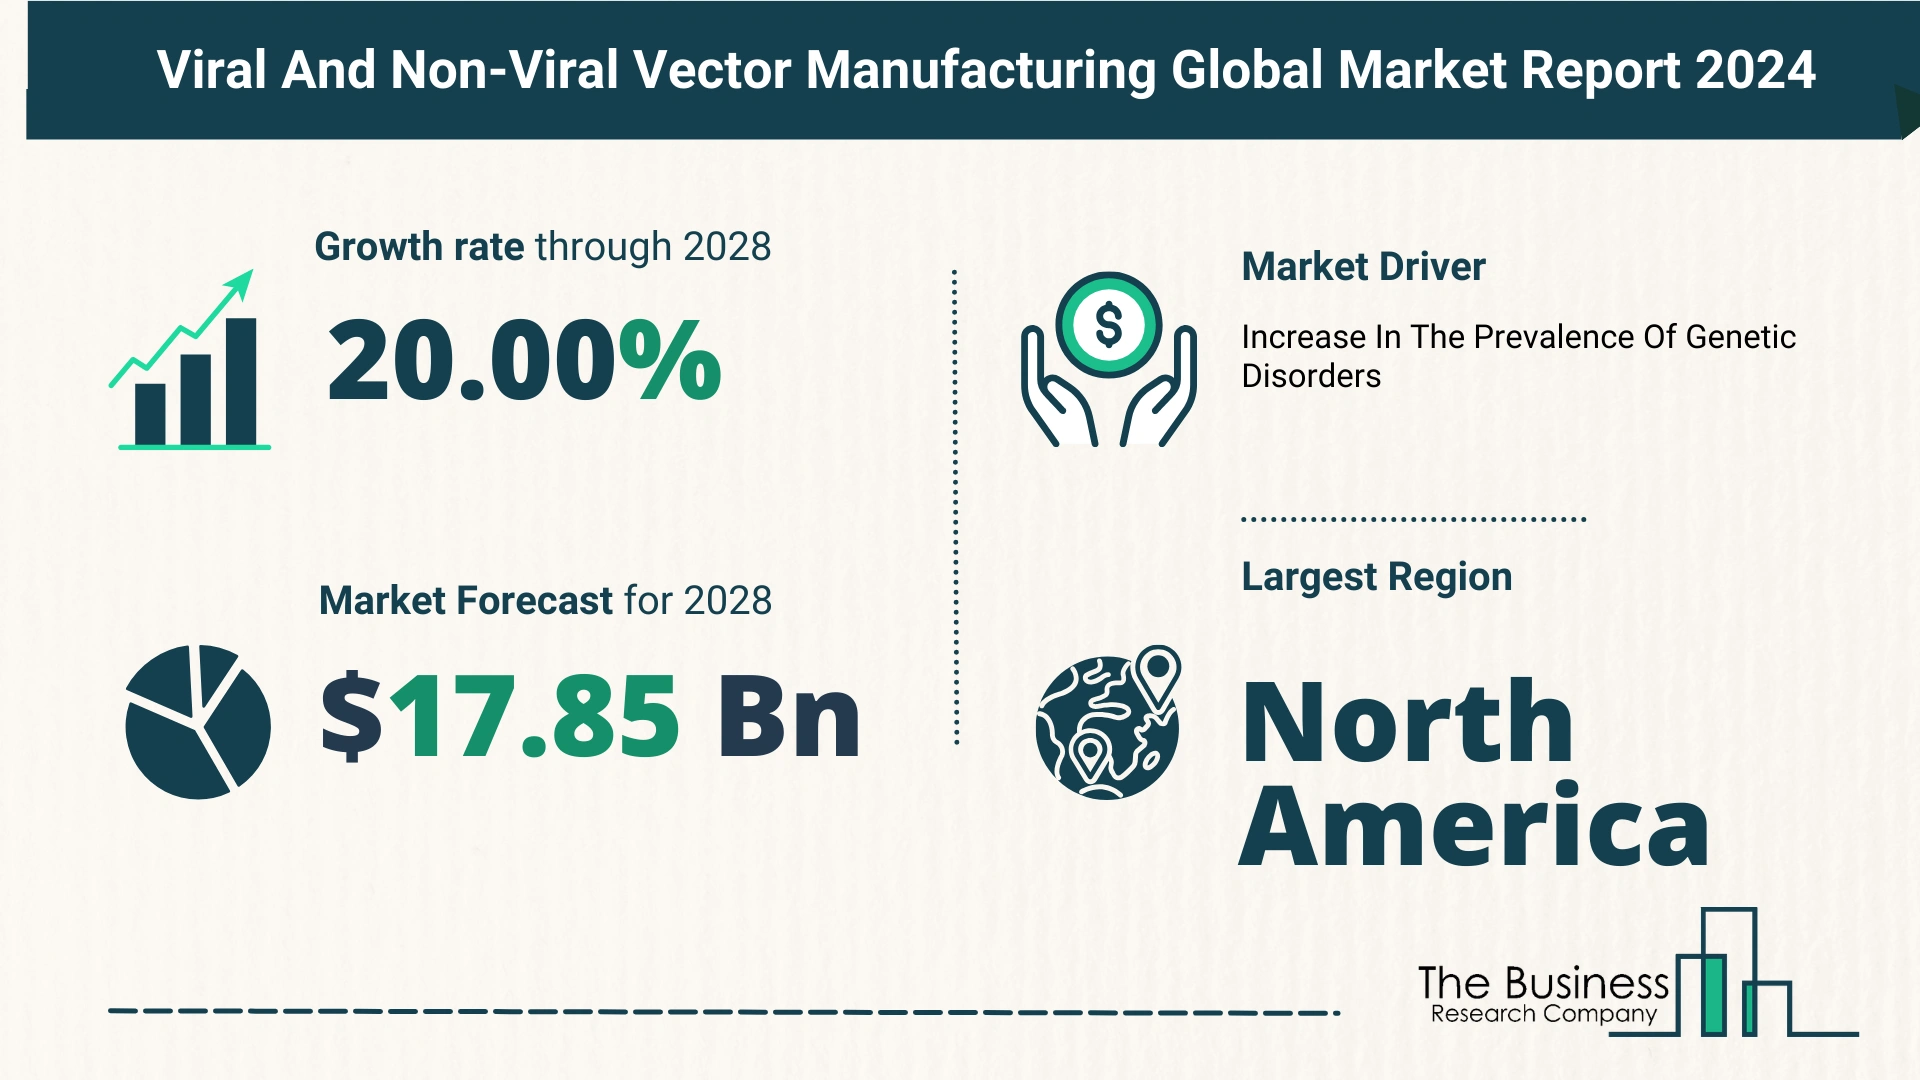 Global Viral And Non-Viral Vector Manufacturing Market